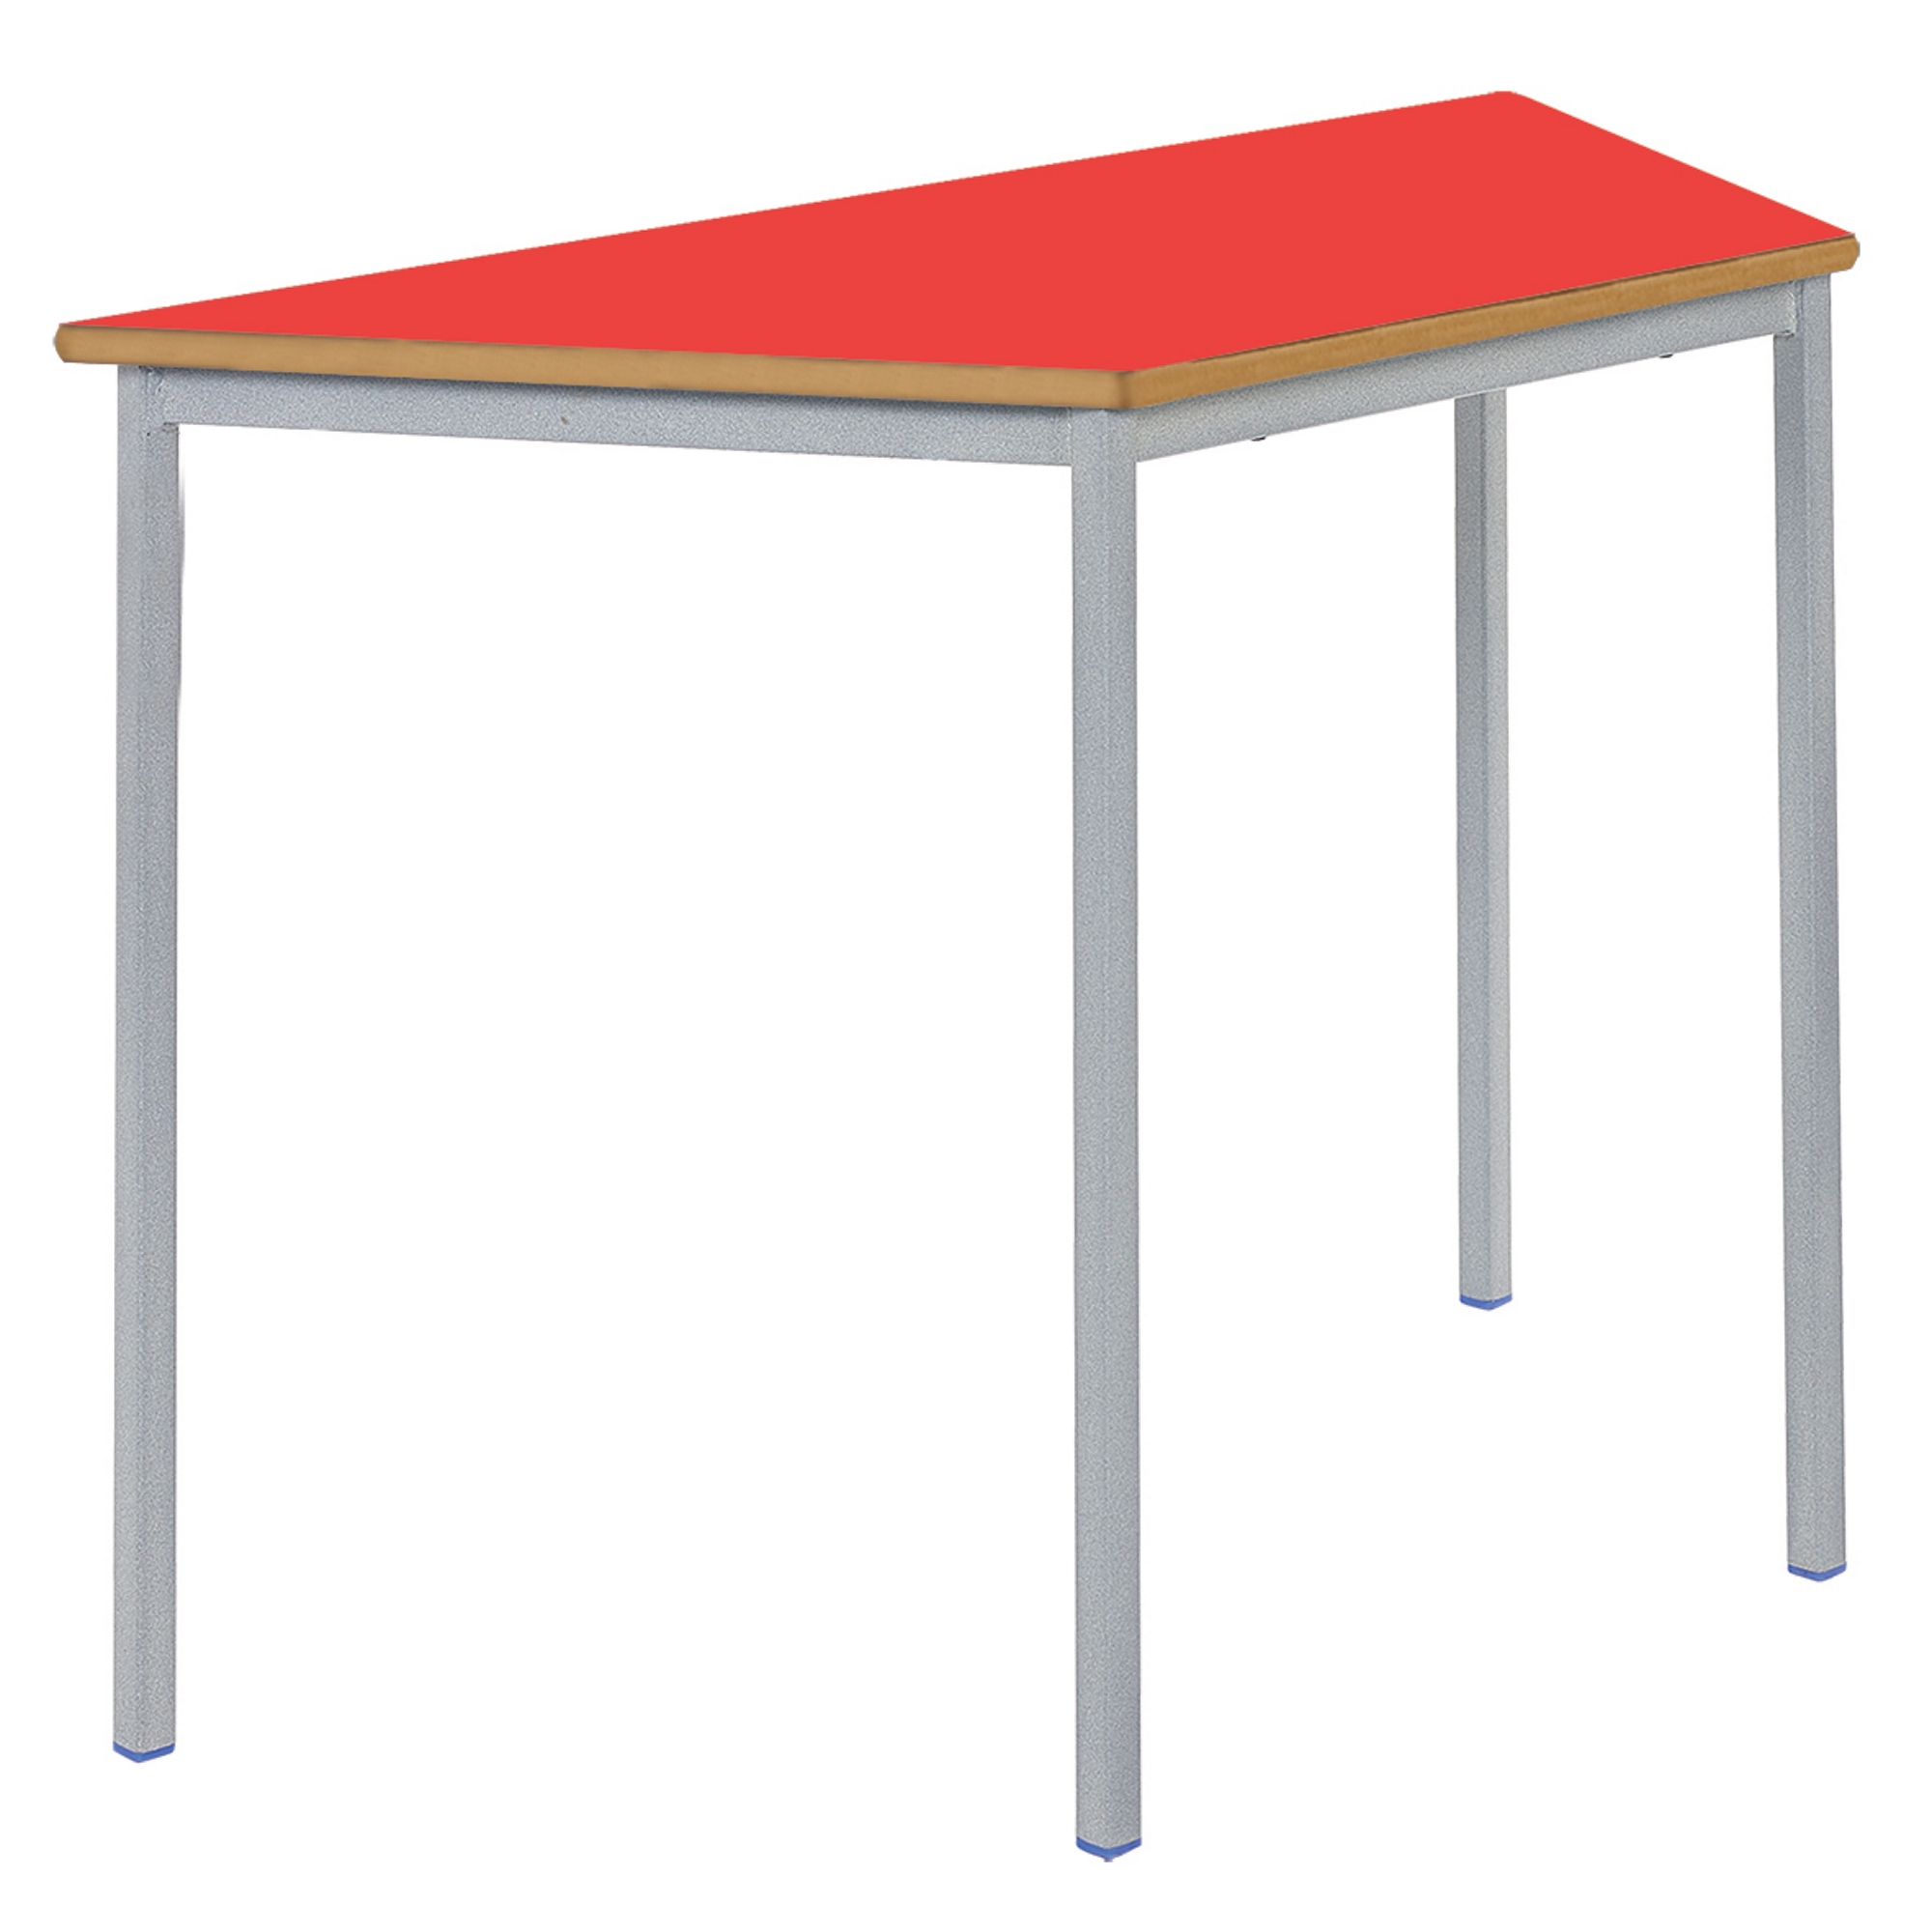 Classmates Trapezoidal Fully Welded Classroom Table - 1100 x 550 x 460mm - Red